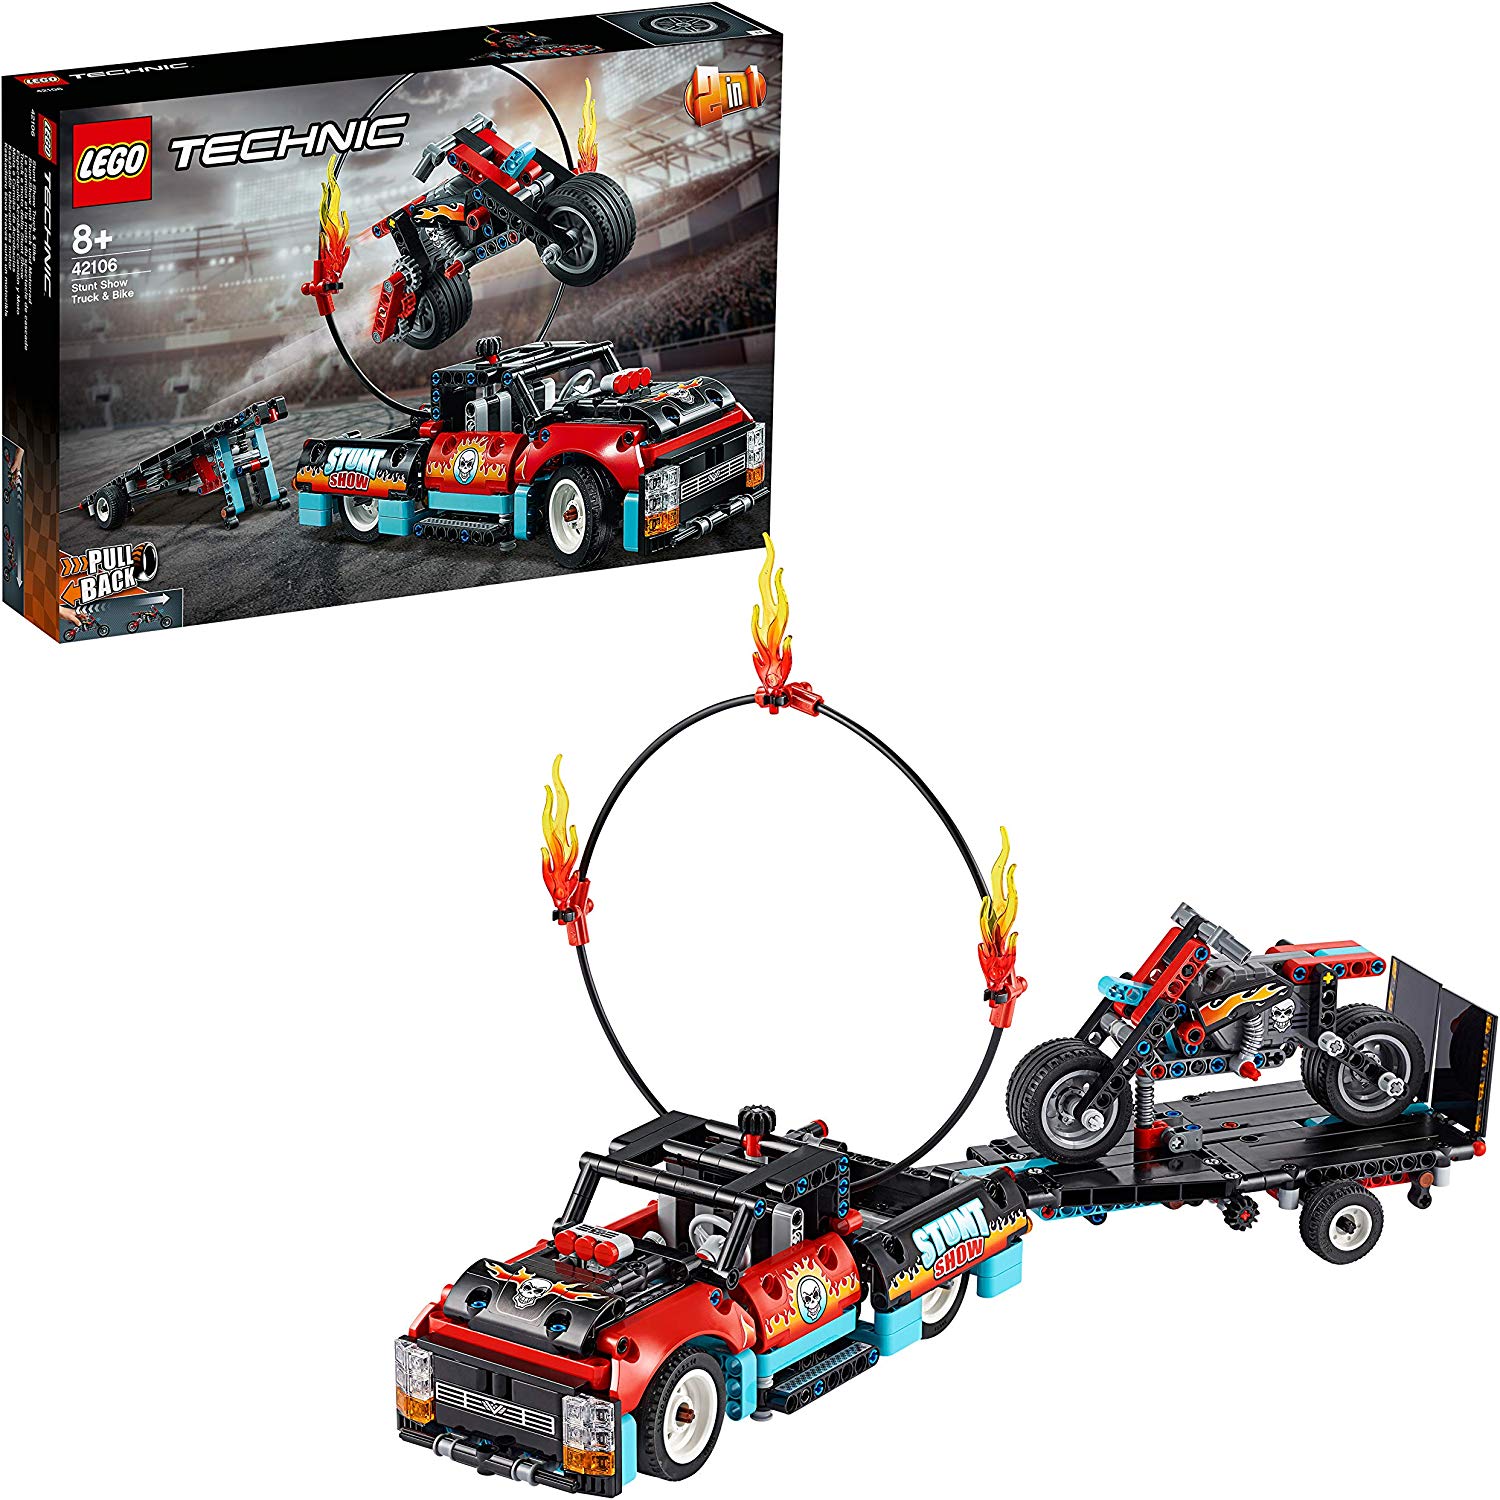 LEGO 42106 Stunt Show with Truck and Motorbike Technic Construction Kit